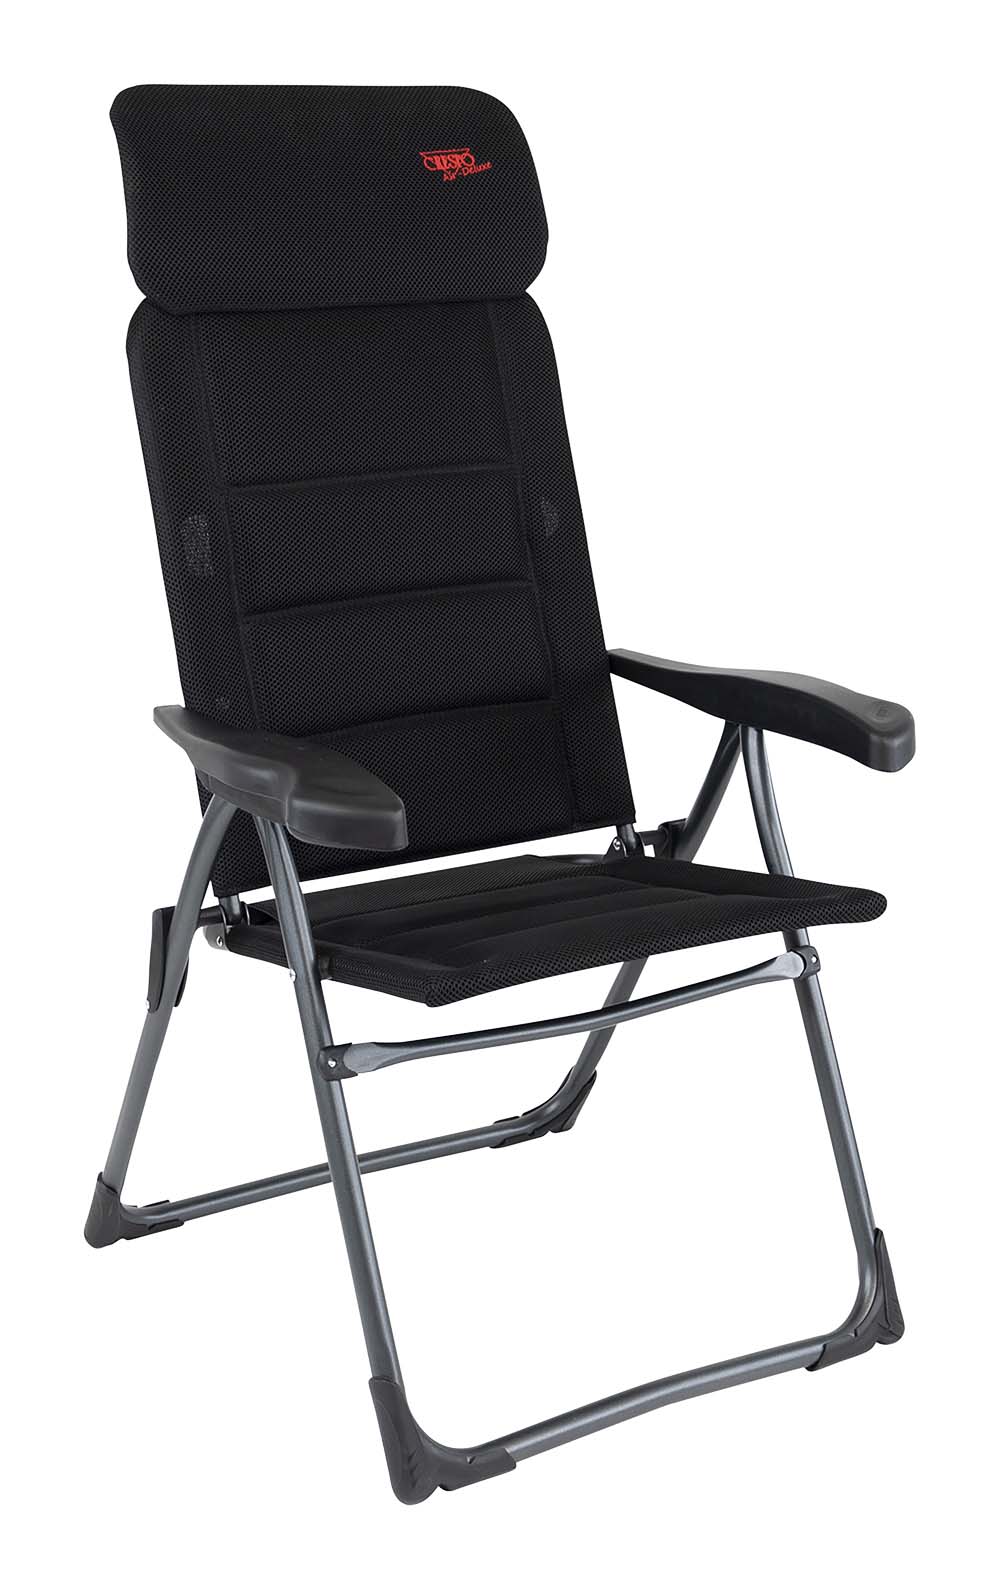 1148012 An extremely compact standing chair. The chair folds flat, this chair is also considered the flattest camping chair. This chair offers maximum comfort with its 7-position adjustable backrest and infinitely adjustable headrest. This chair is equipped with an Air-Deluxe fabric. This comfortable fabric is easy to maintain, has an open cell structure and is therefore air and water permeable. This makes the chair dry much faster than chairs with traditional foam padding. The chair features a U-frame with stabilizers and extra thick tubes for extra strength and stability. This chair is extra compact to store due to the retractable headrest. Up to 50% less packing volume compared to other camping chairs! The chair is of high quality with TÜV Hallmark.